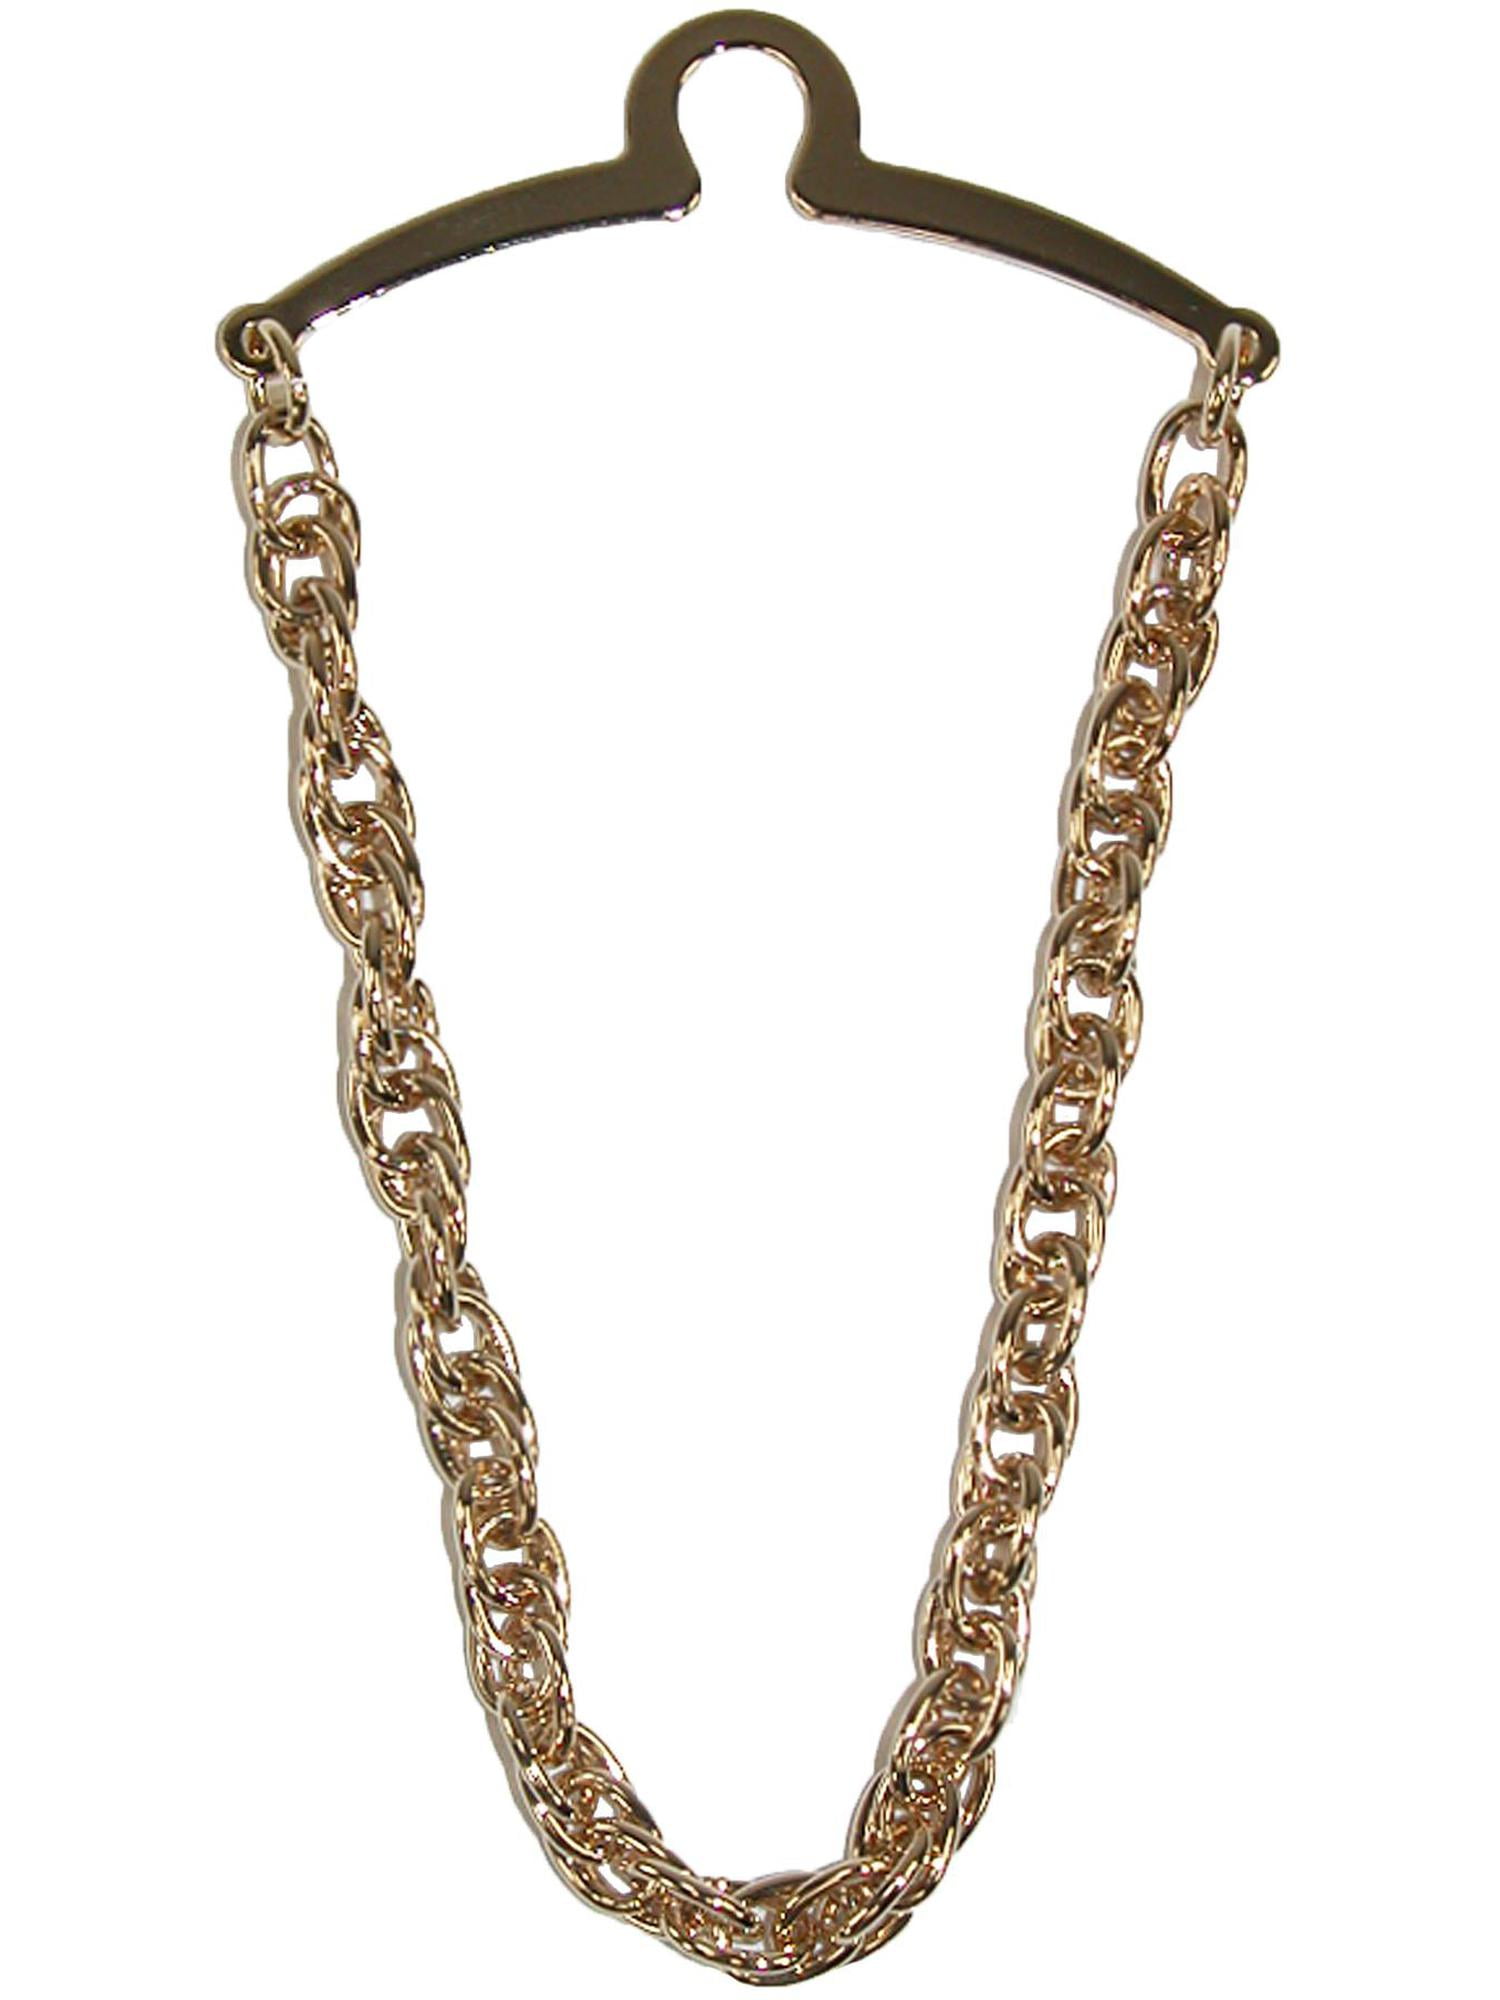 New Competition Inc Men's Double Loop Tie Chain 